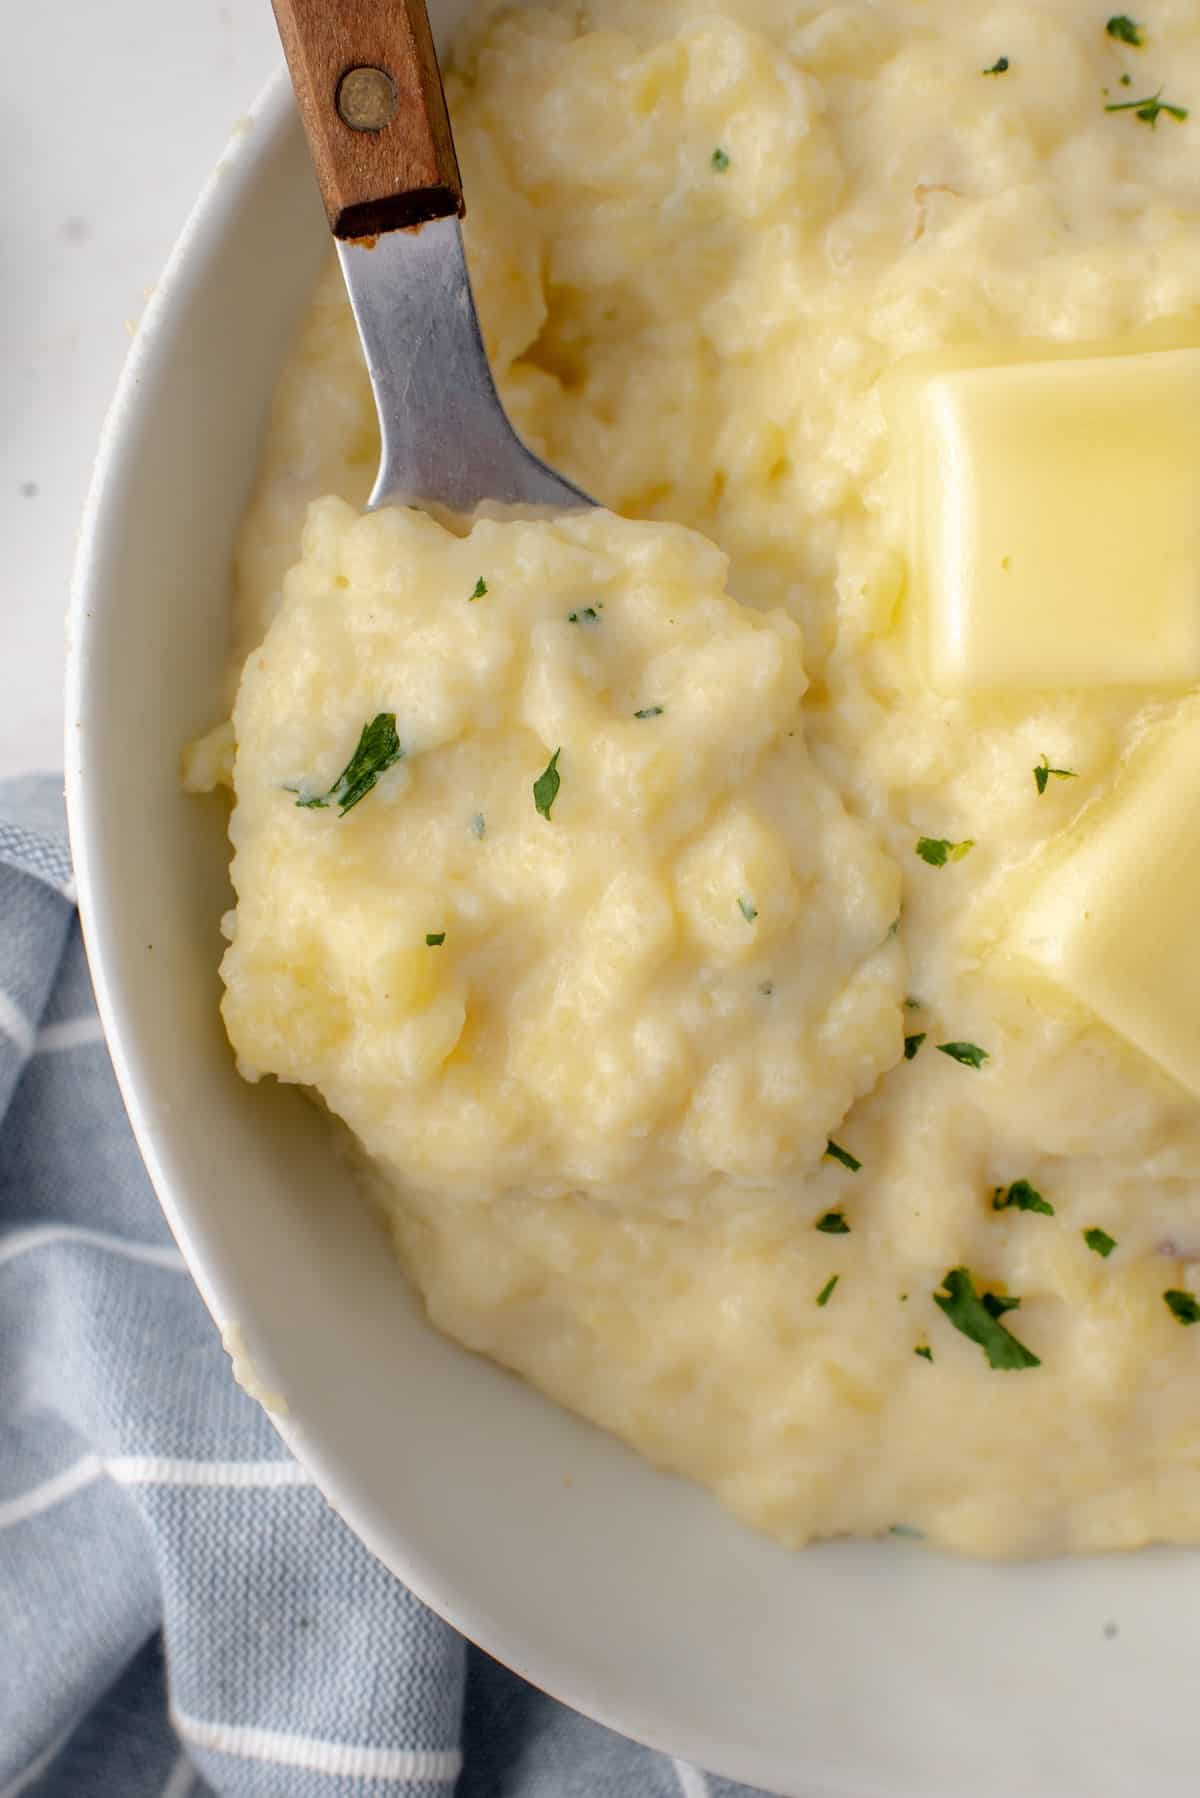 A bowl of no drain mashed potatoes with a serving spoon.